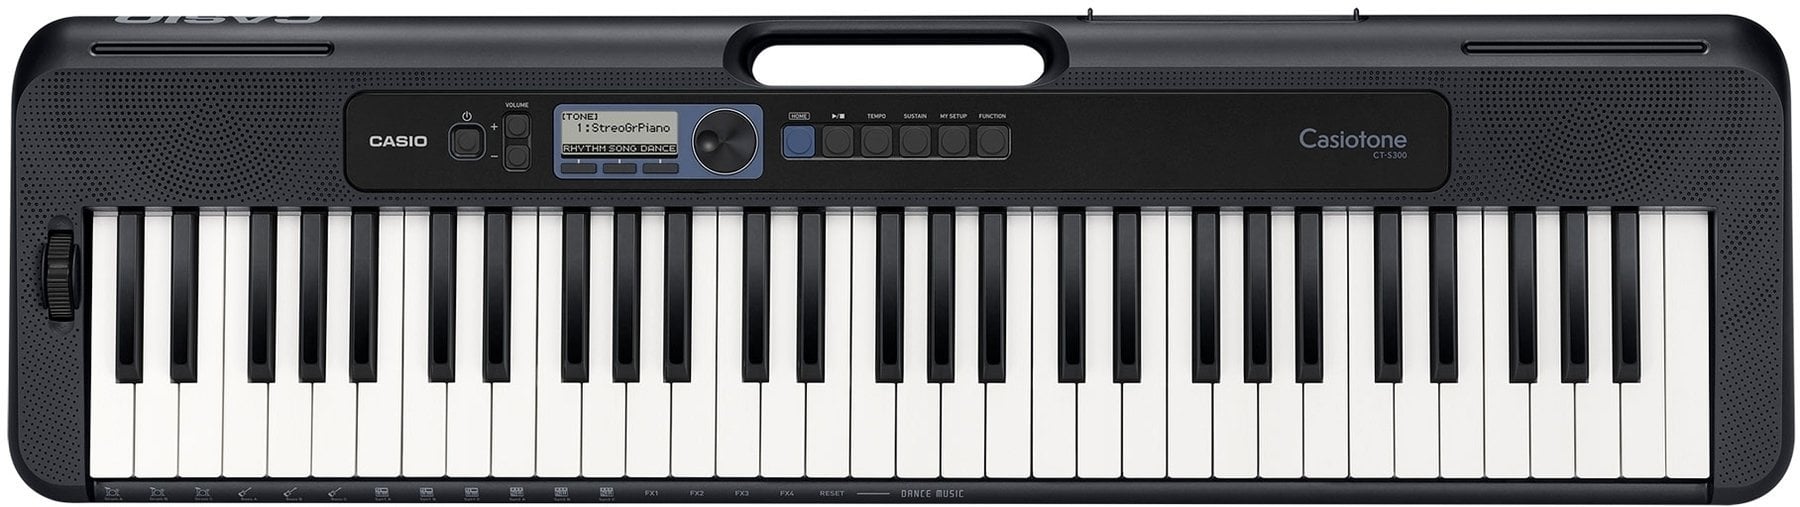 Keyboard with Touch Response Casio CT-S300 (Just unboxed)